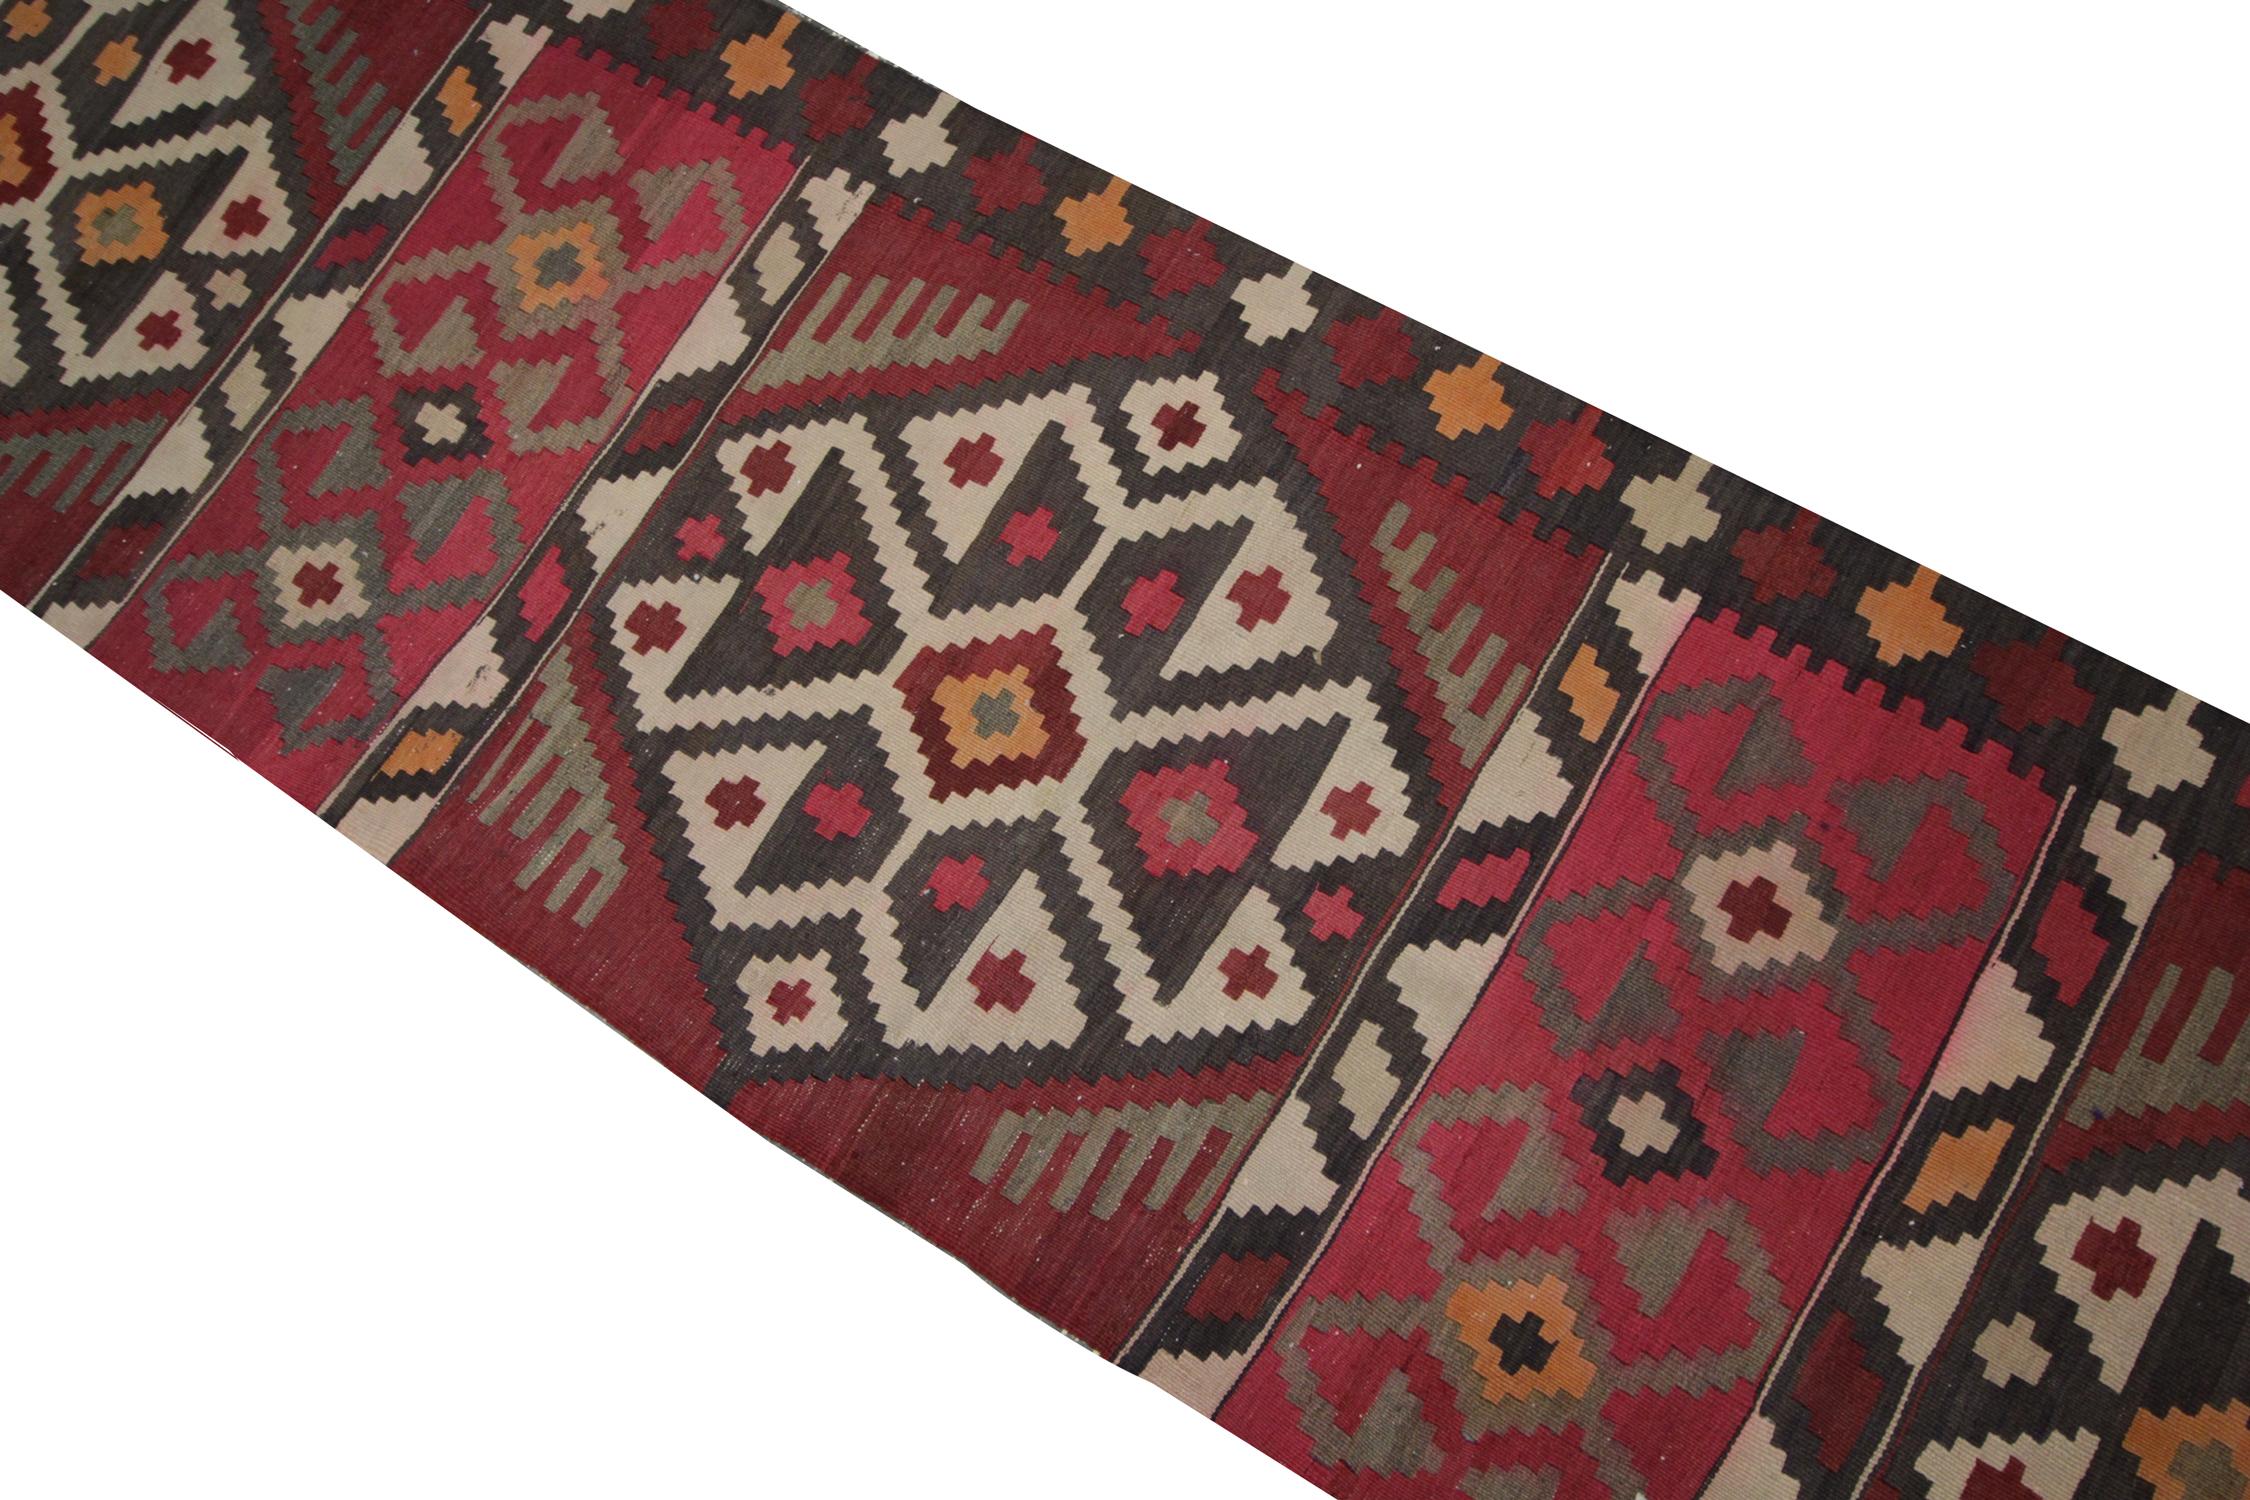 This fine wool Kilim Runner is a modern flat-weave Kilim rug constructed in the early 2000s. The design features a repeat geometric design woven with a vibrant colour palette including green, rust, beige and brown that make up the repeat geometric